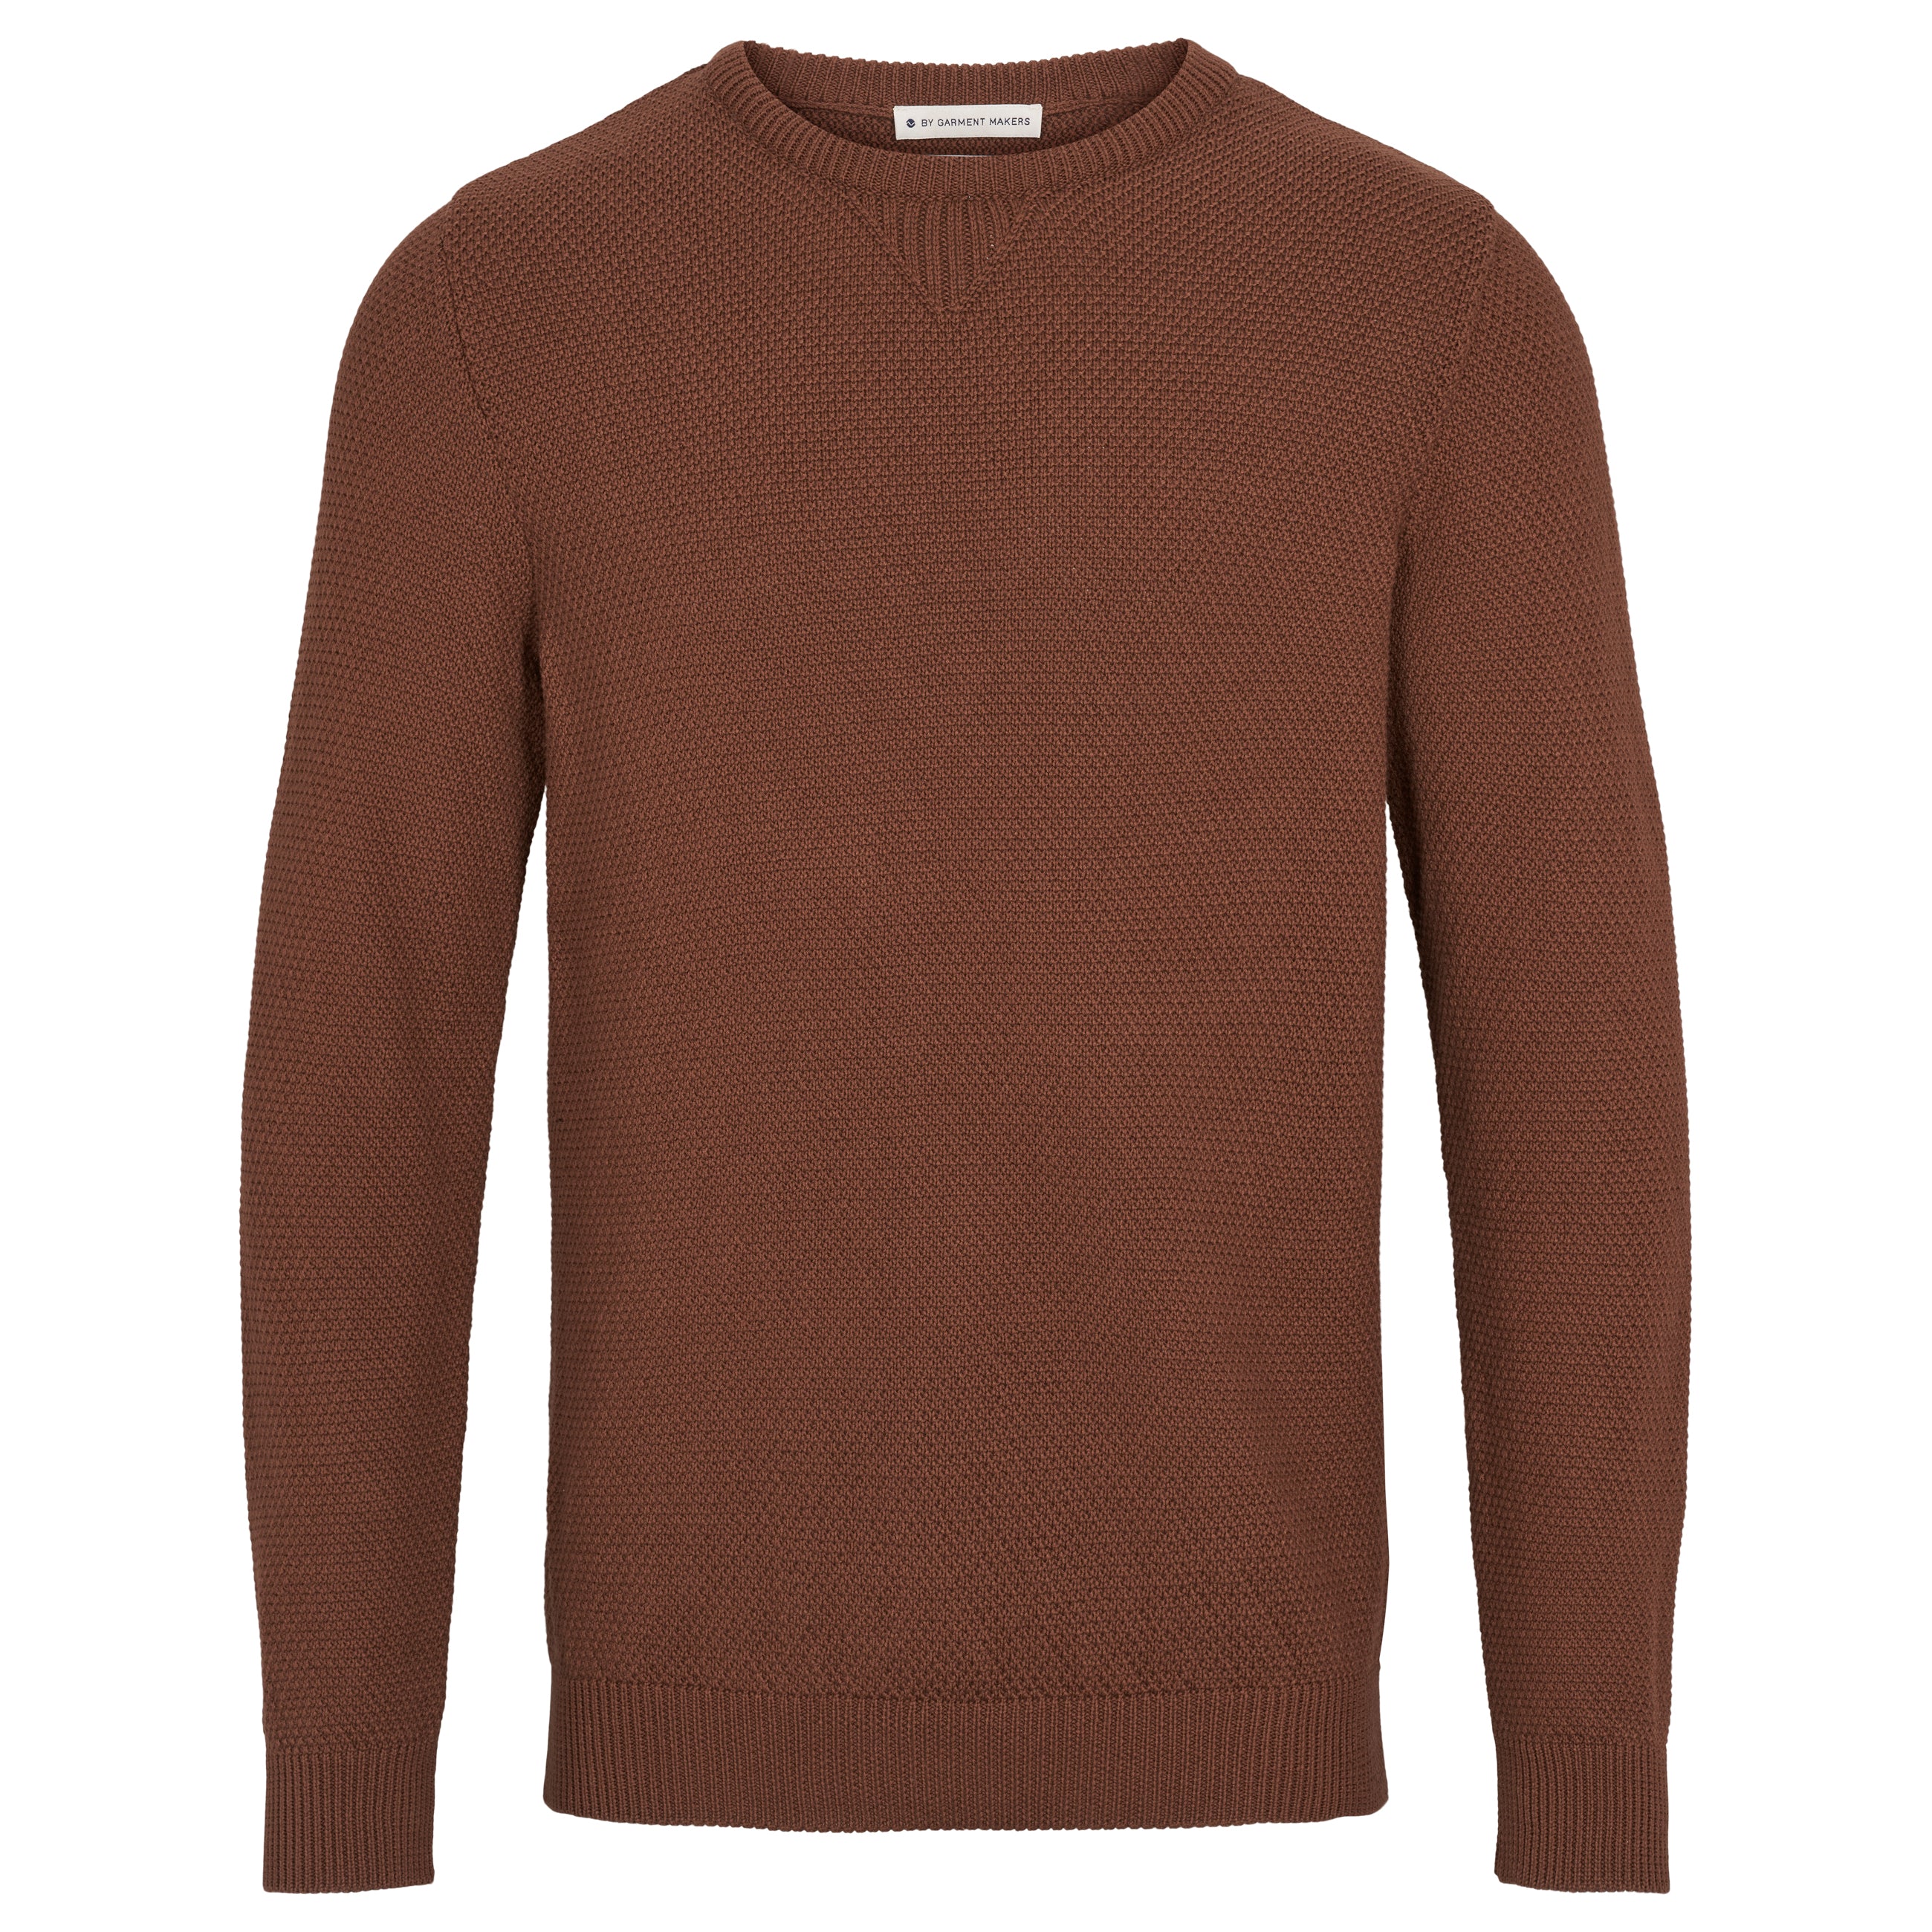 By Garment Makers The Organic Waffle Knit Knit 1258 Beaver